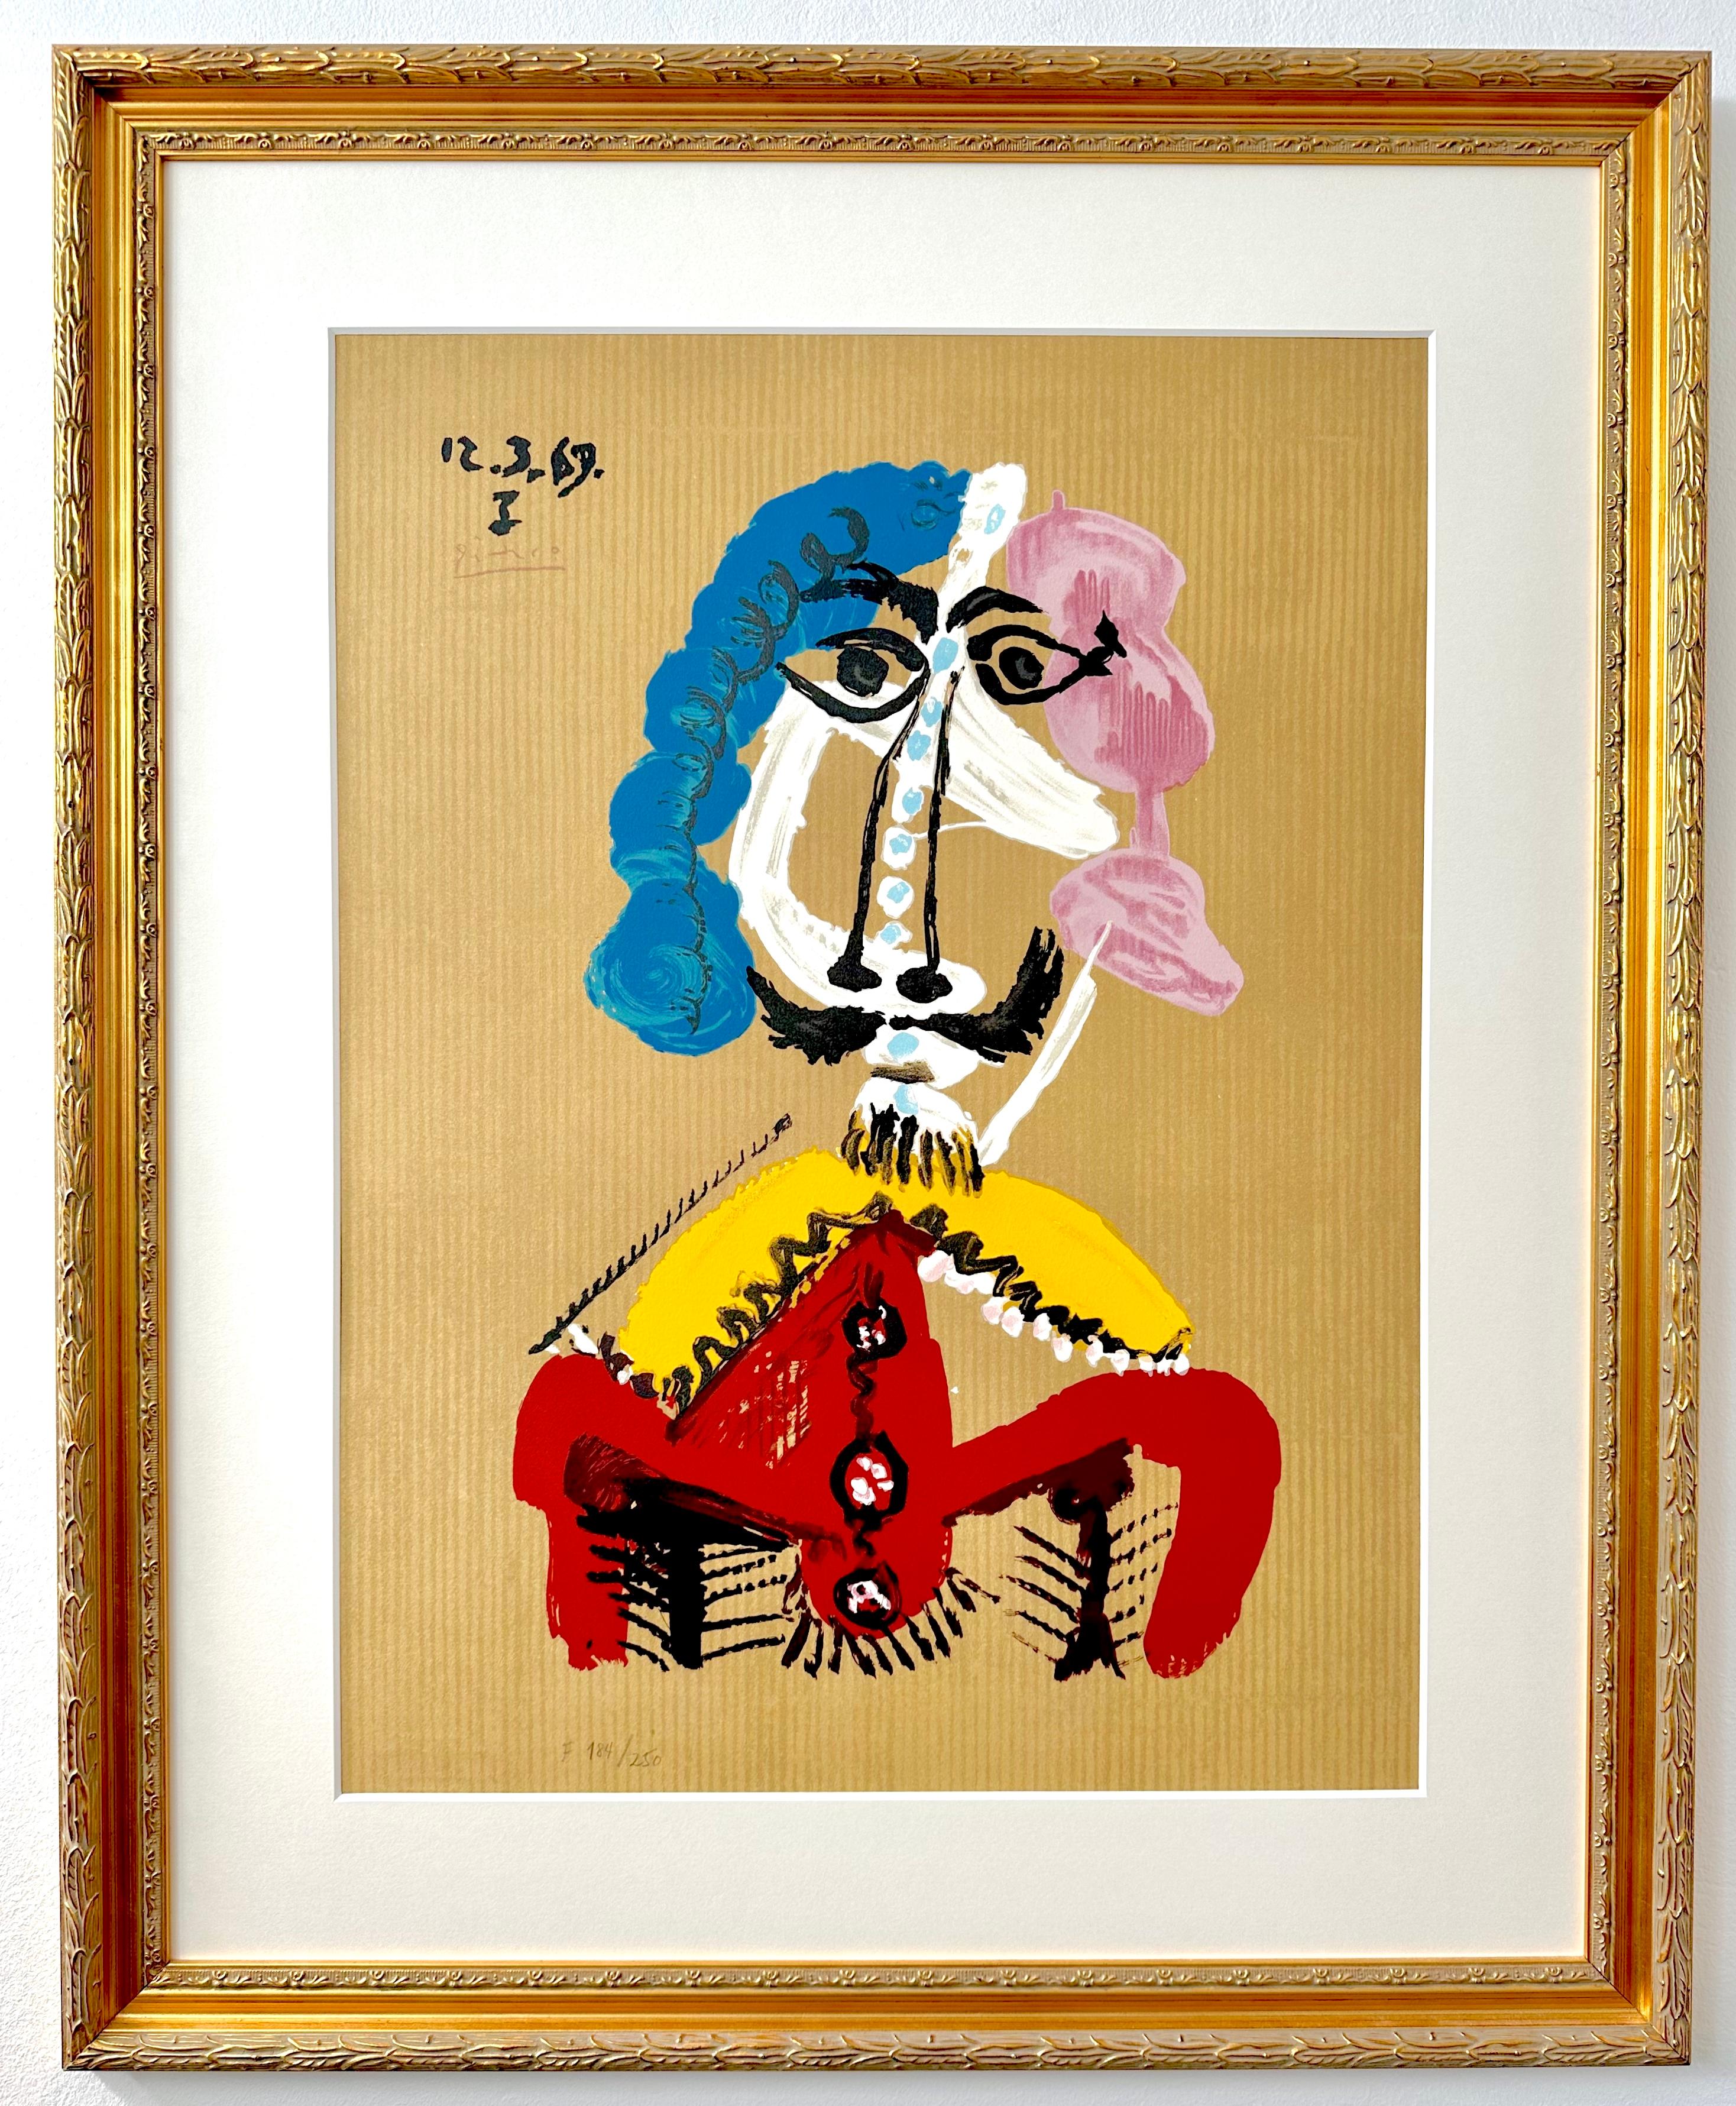 Pablo Picasso – Portrait Imaginaires 12.3.69 I
Color lithograph from the serie ‘Portraits Imaginaires’
Published by Georges Salinas, 1970
Edition: 250 for France (F) and 250 for America (A)
Signed in the stone, numbered (F 184/ 250) in pencil
Image: